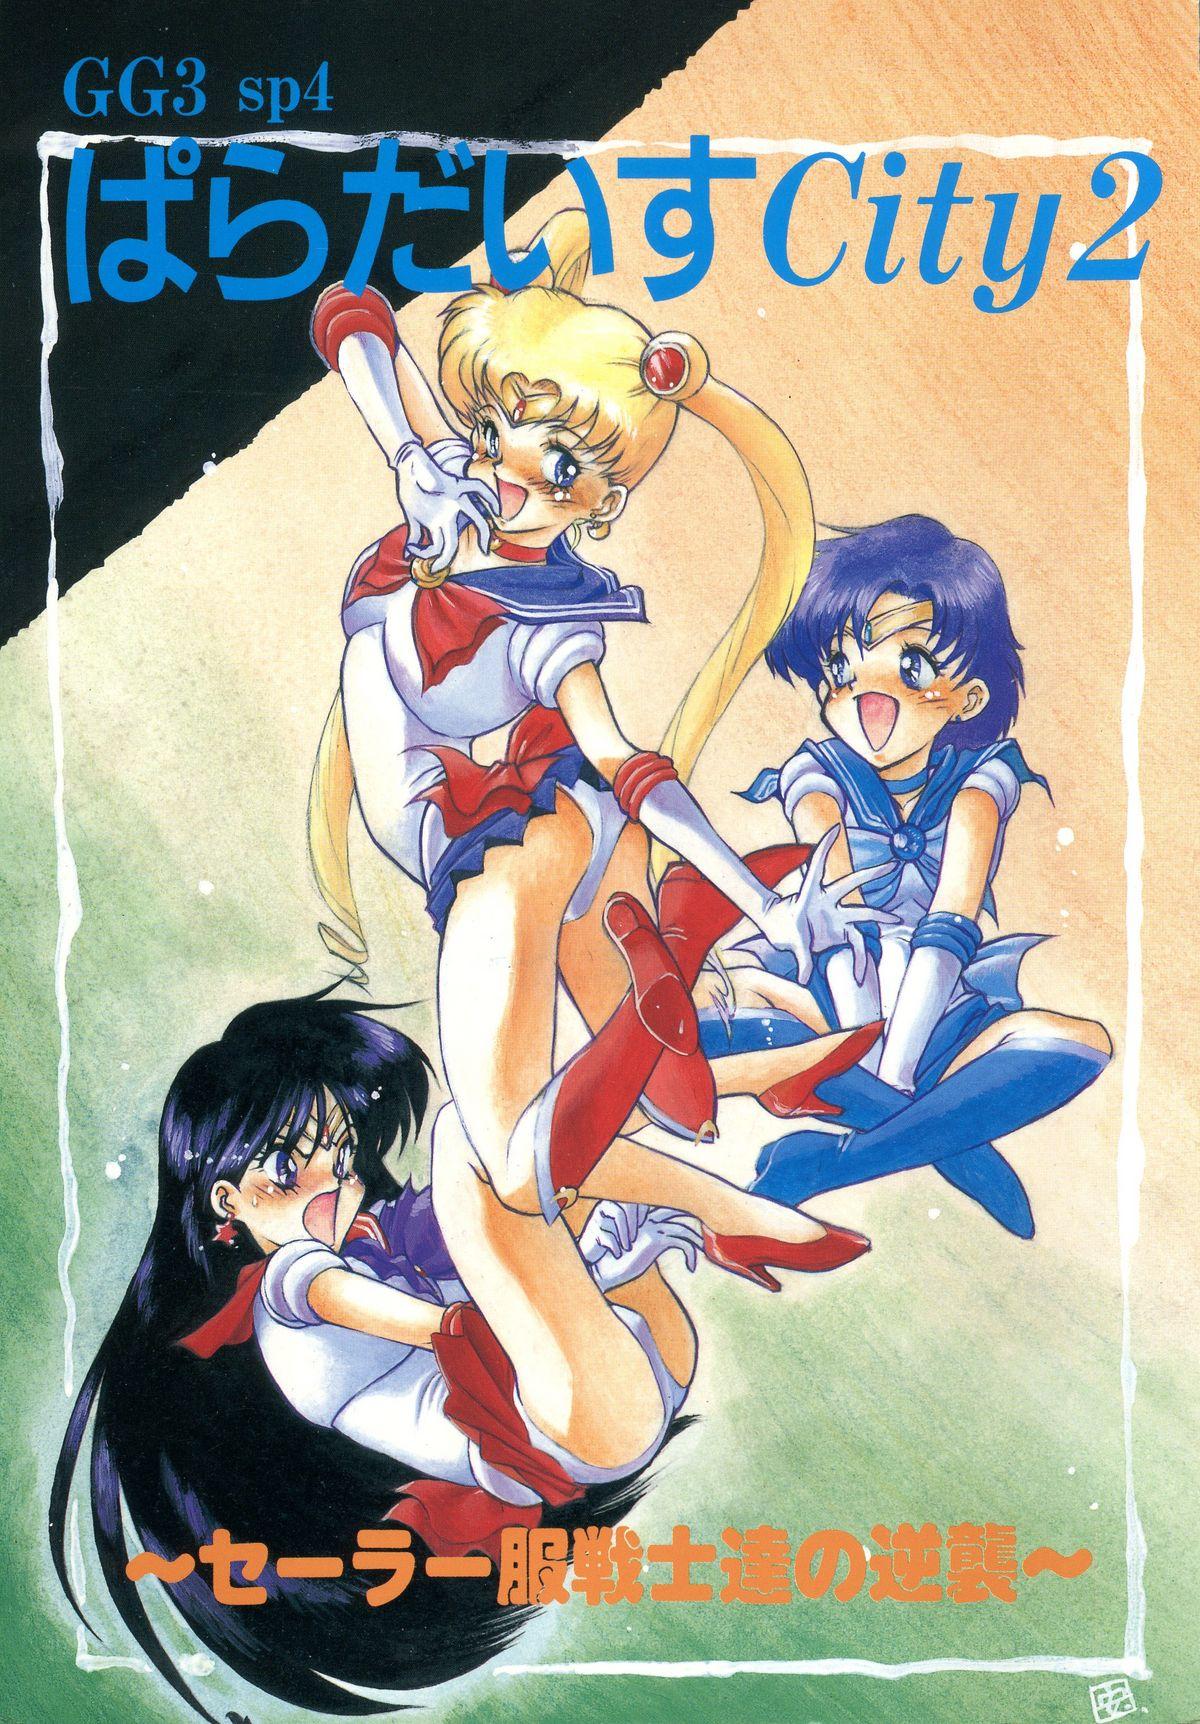 Dominicana GG3 SP 4 - Paradise City 2 - Sailor moon Chibola - Picture 1